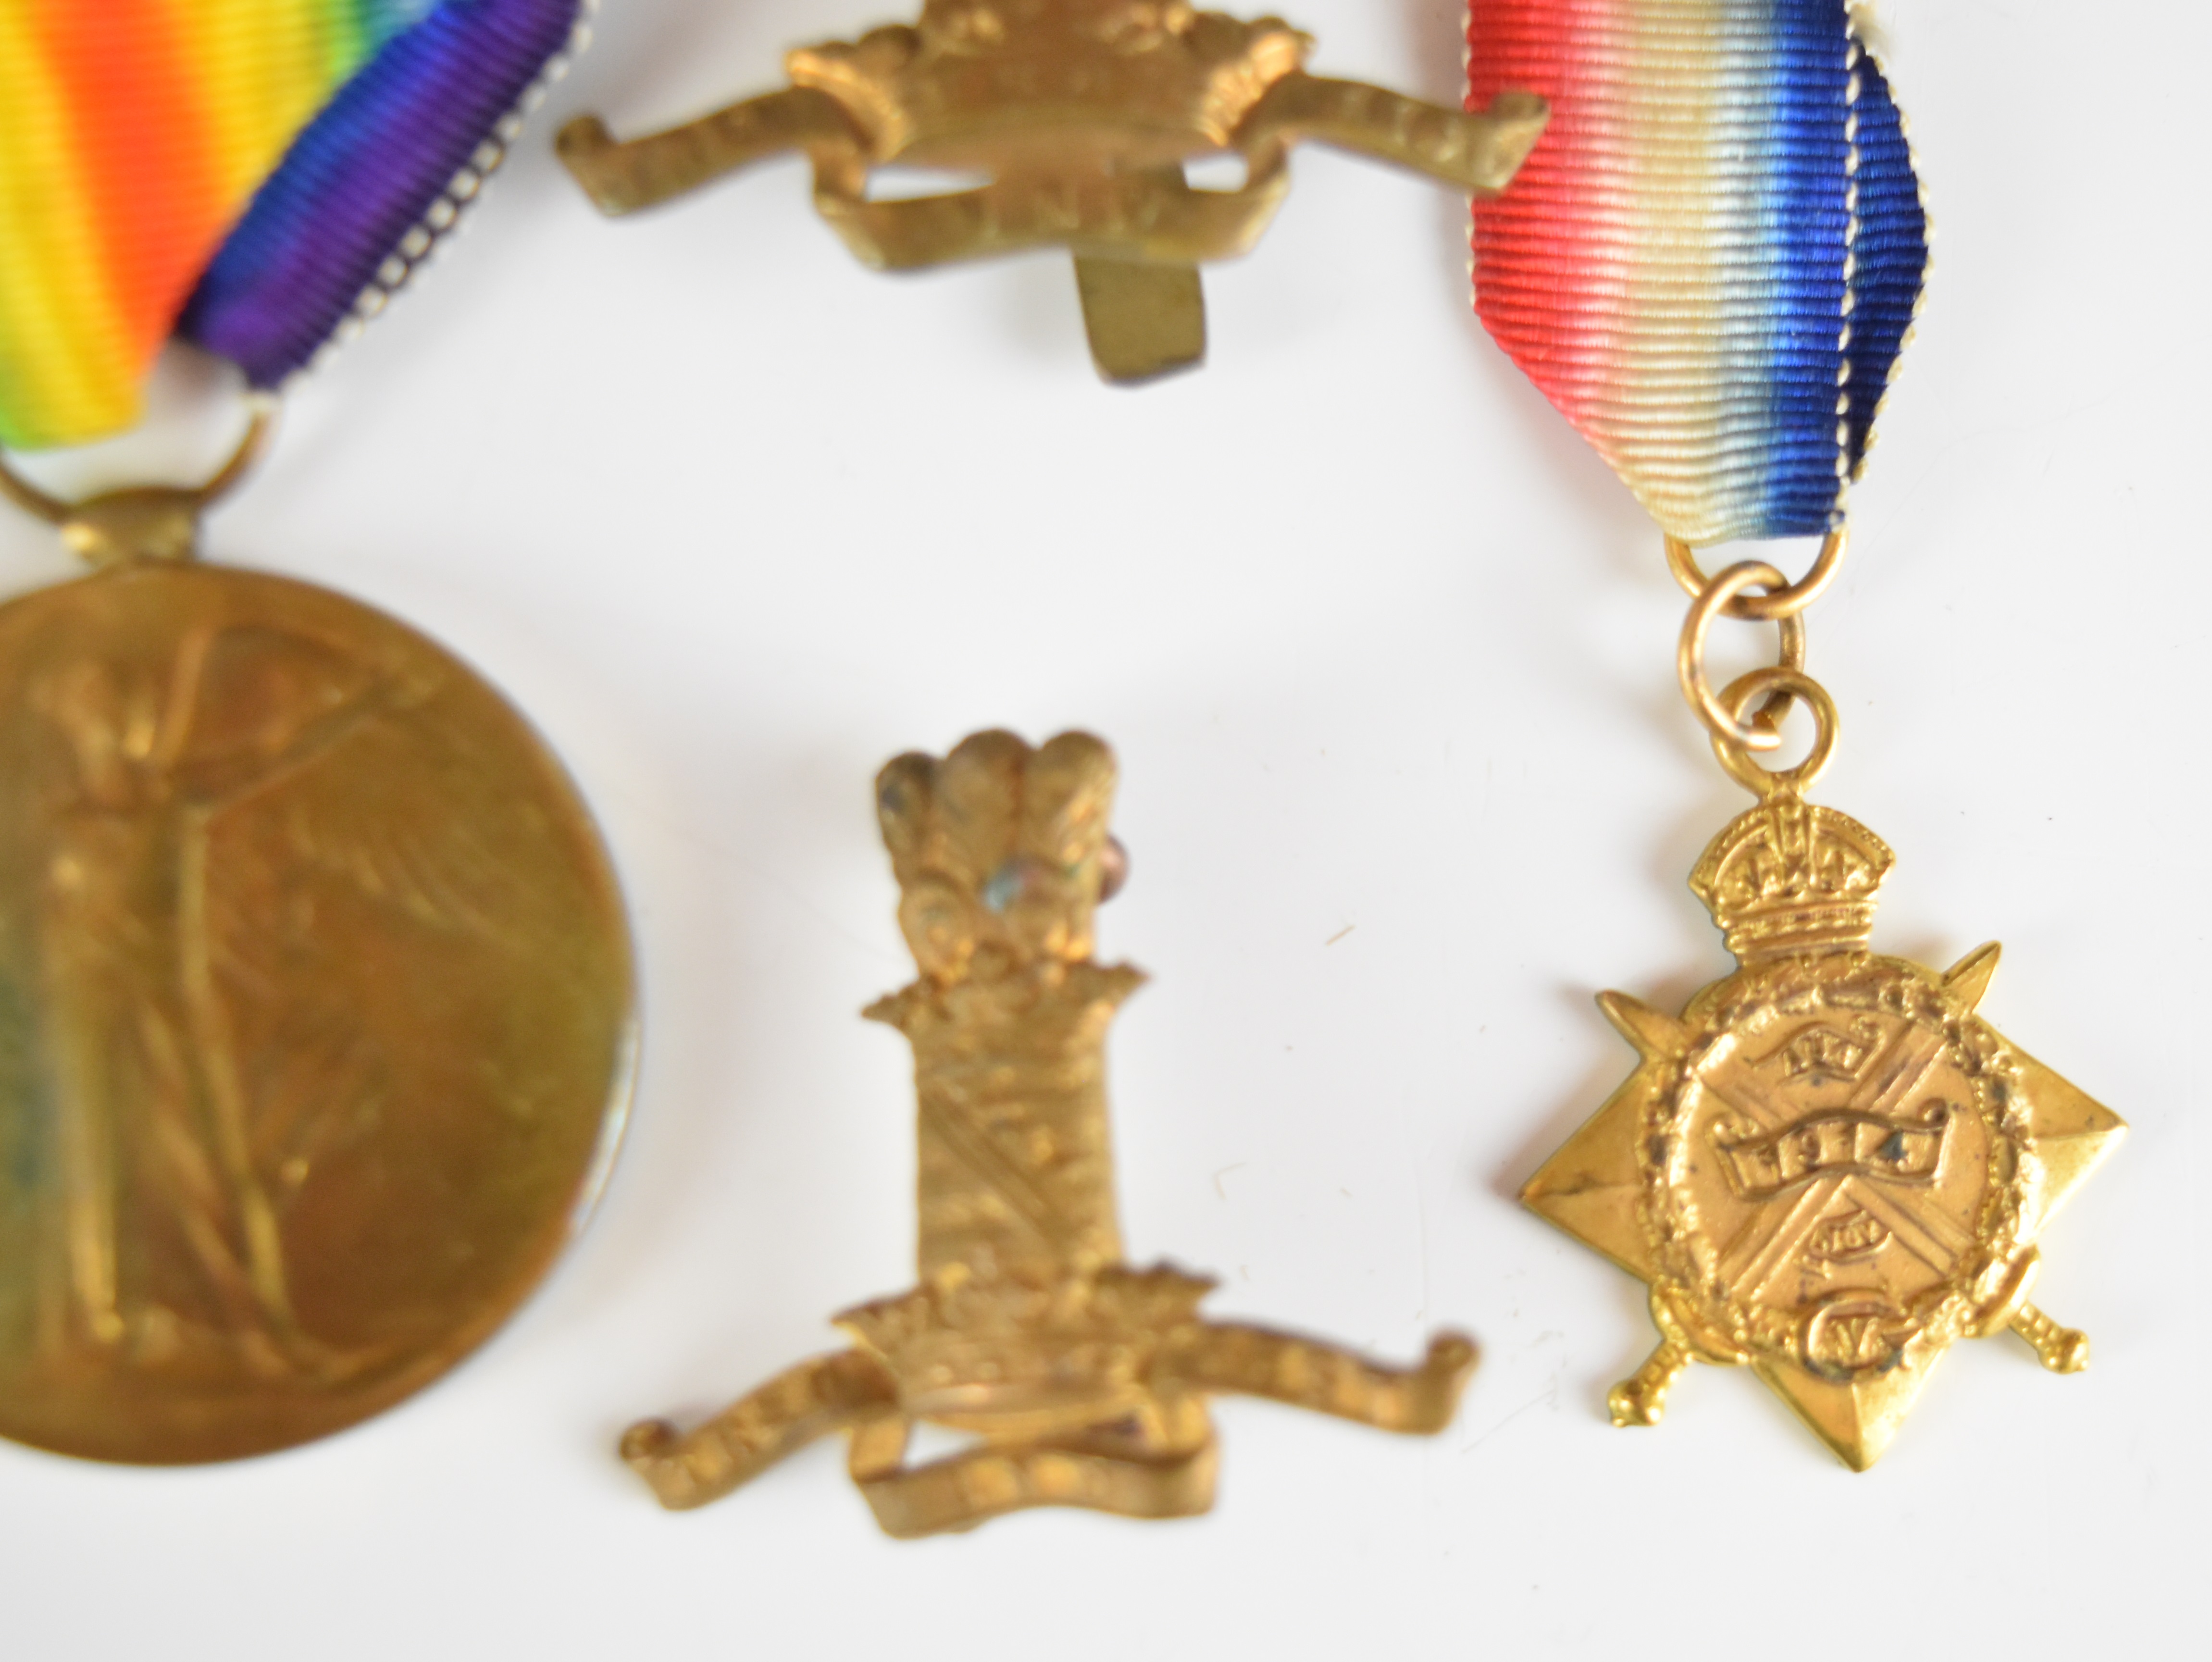 British Army WW1 11th Hussars medal trio comprising 1914 'Mons' Star with clasp for 5th August to - Image 3 of 13